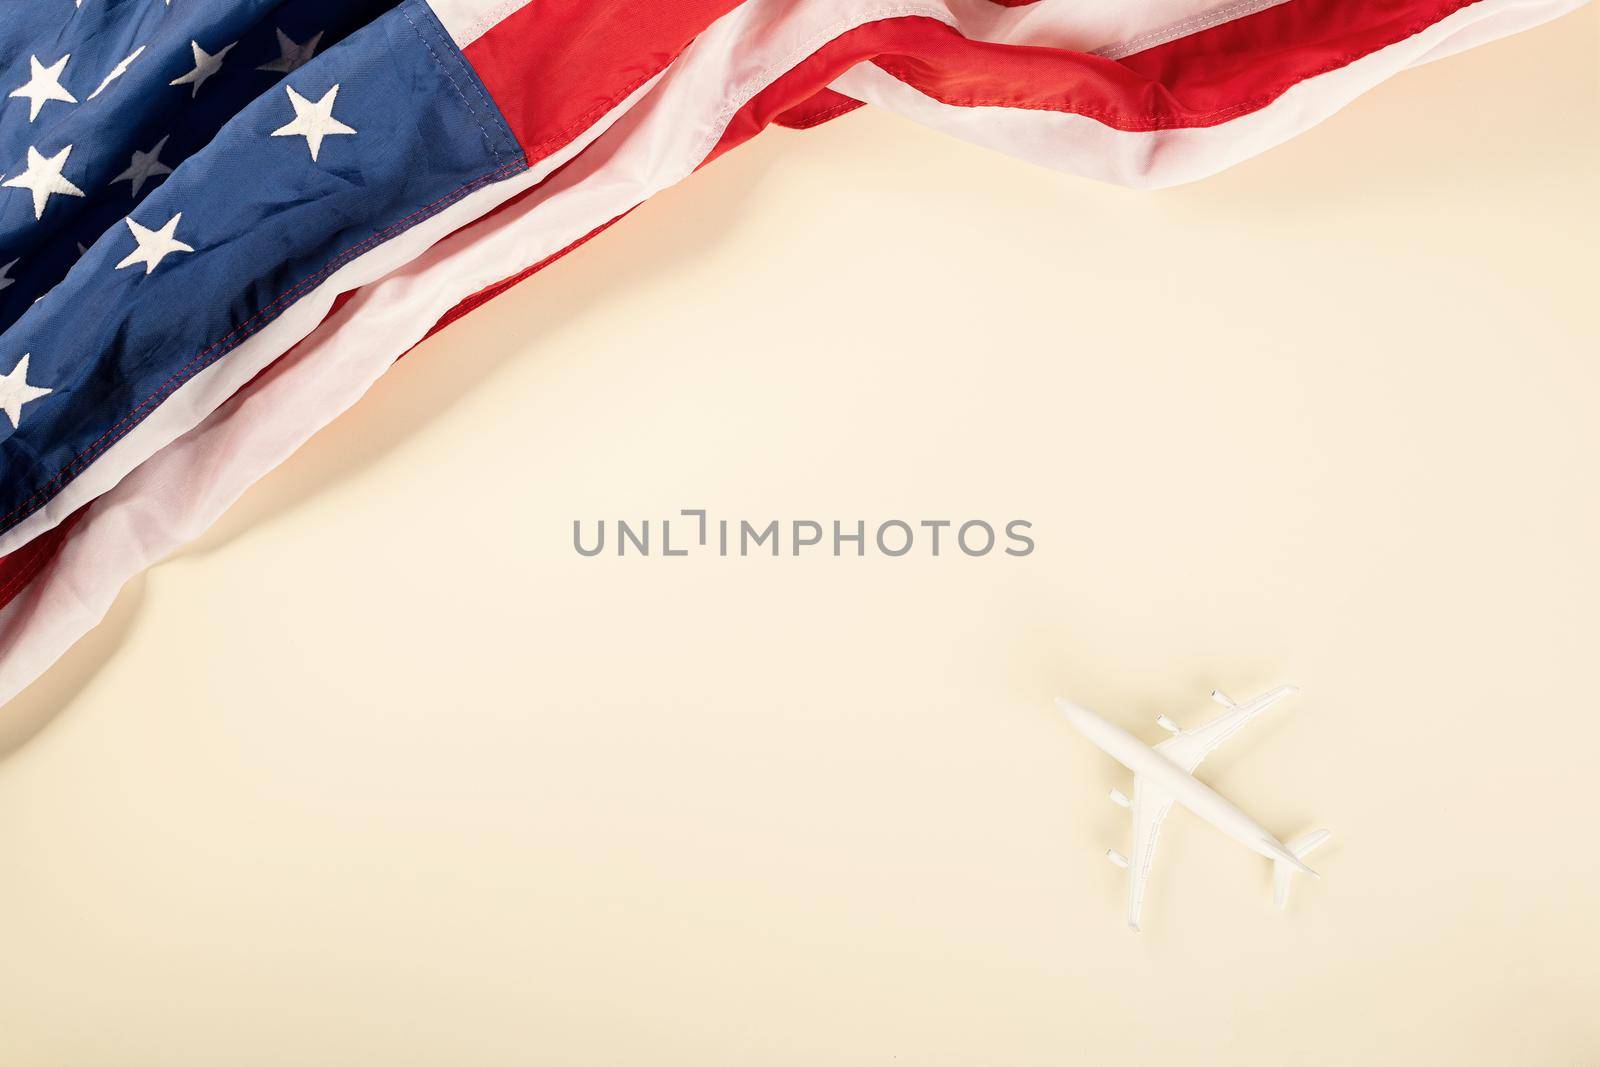 Tourism Day, Model plane and flag of the USA by Sorapop